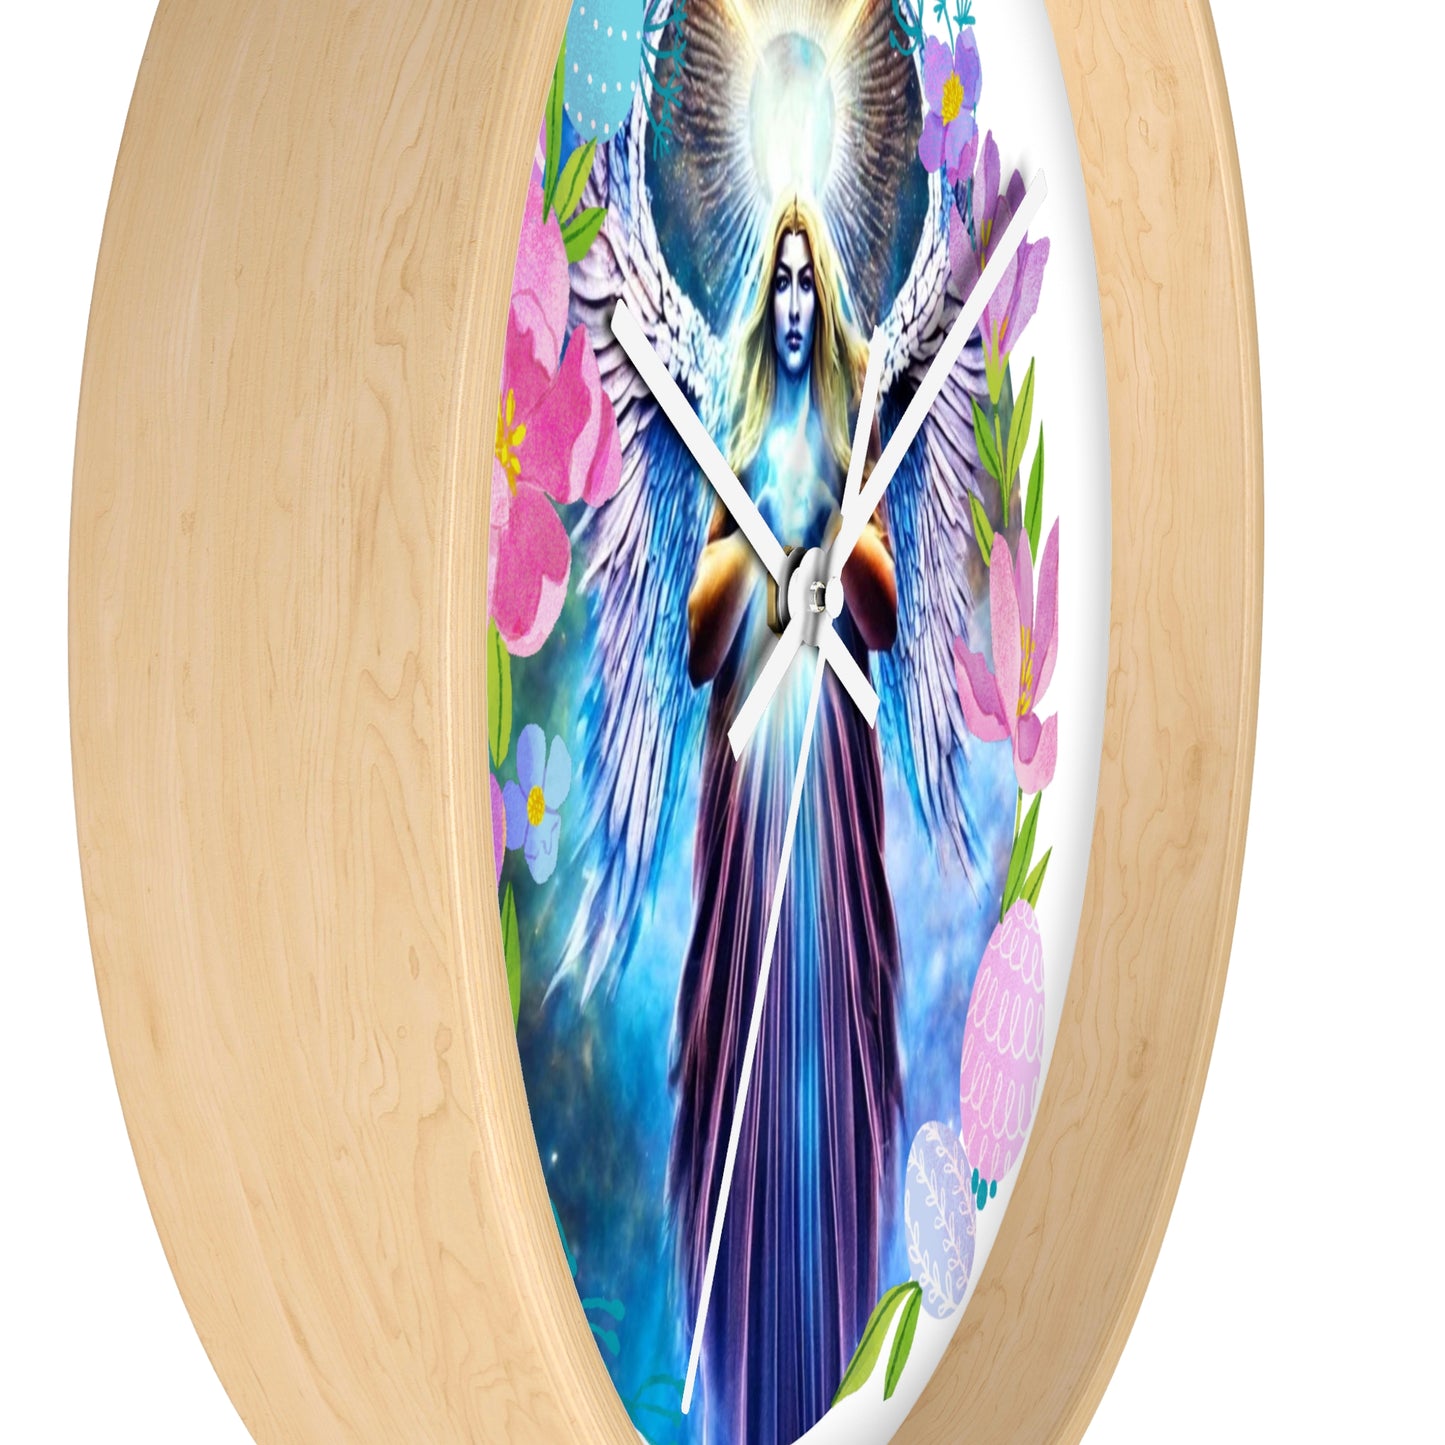 Archangel Metatron Wall Clock - Angelic Thrones: Your Gateway to the Angelic Realms